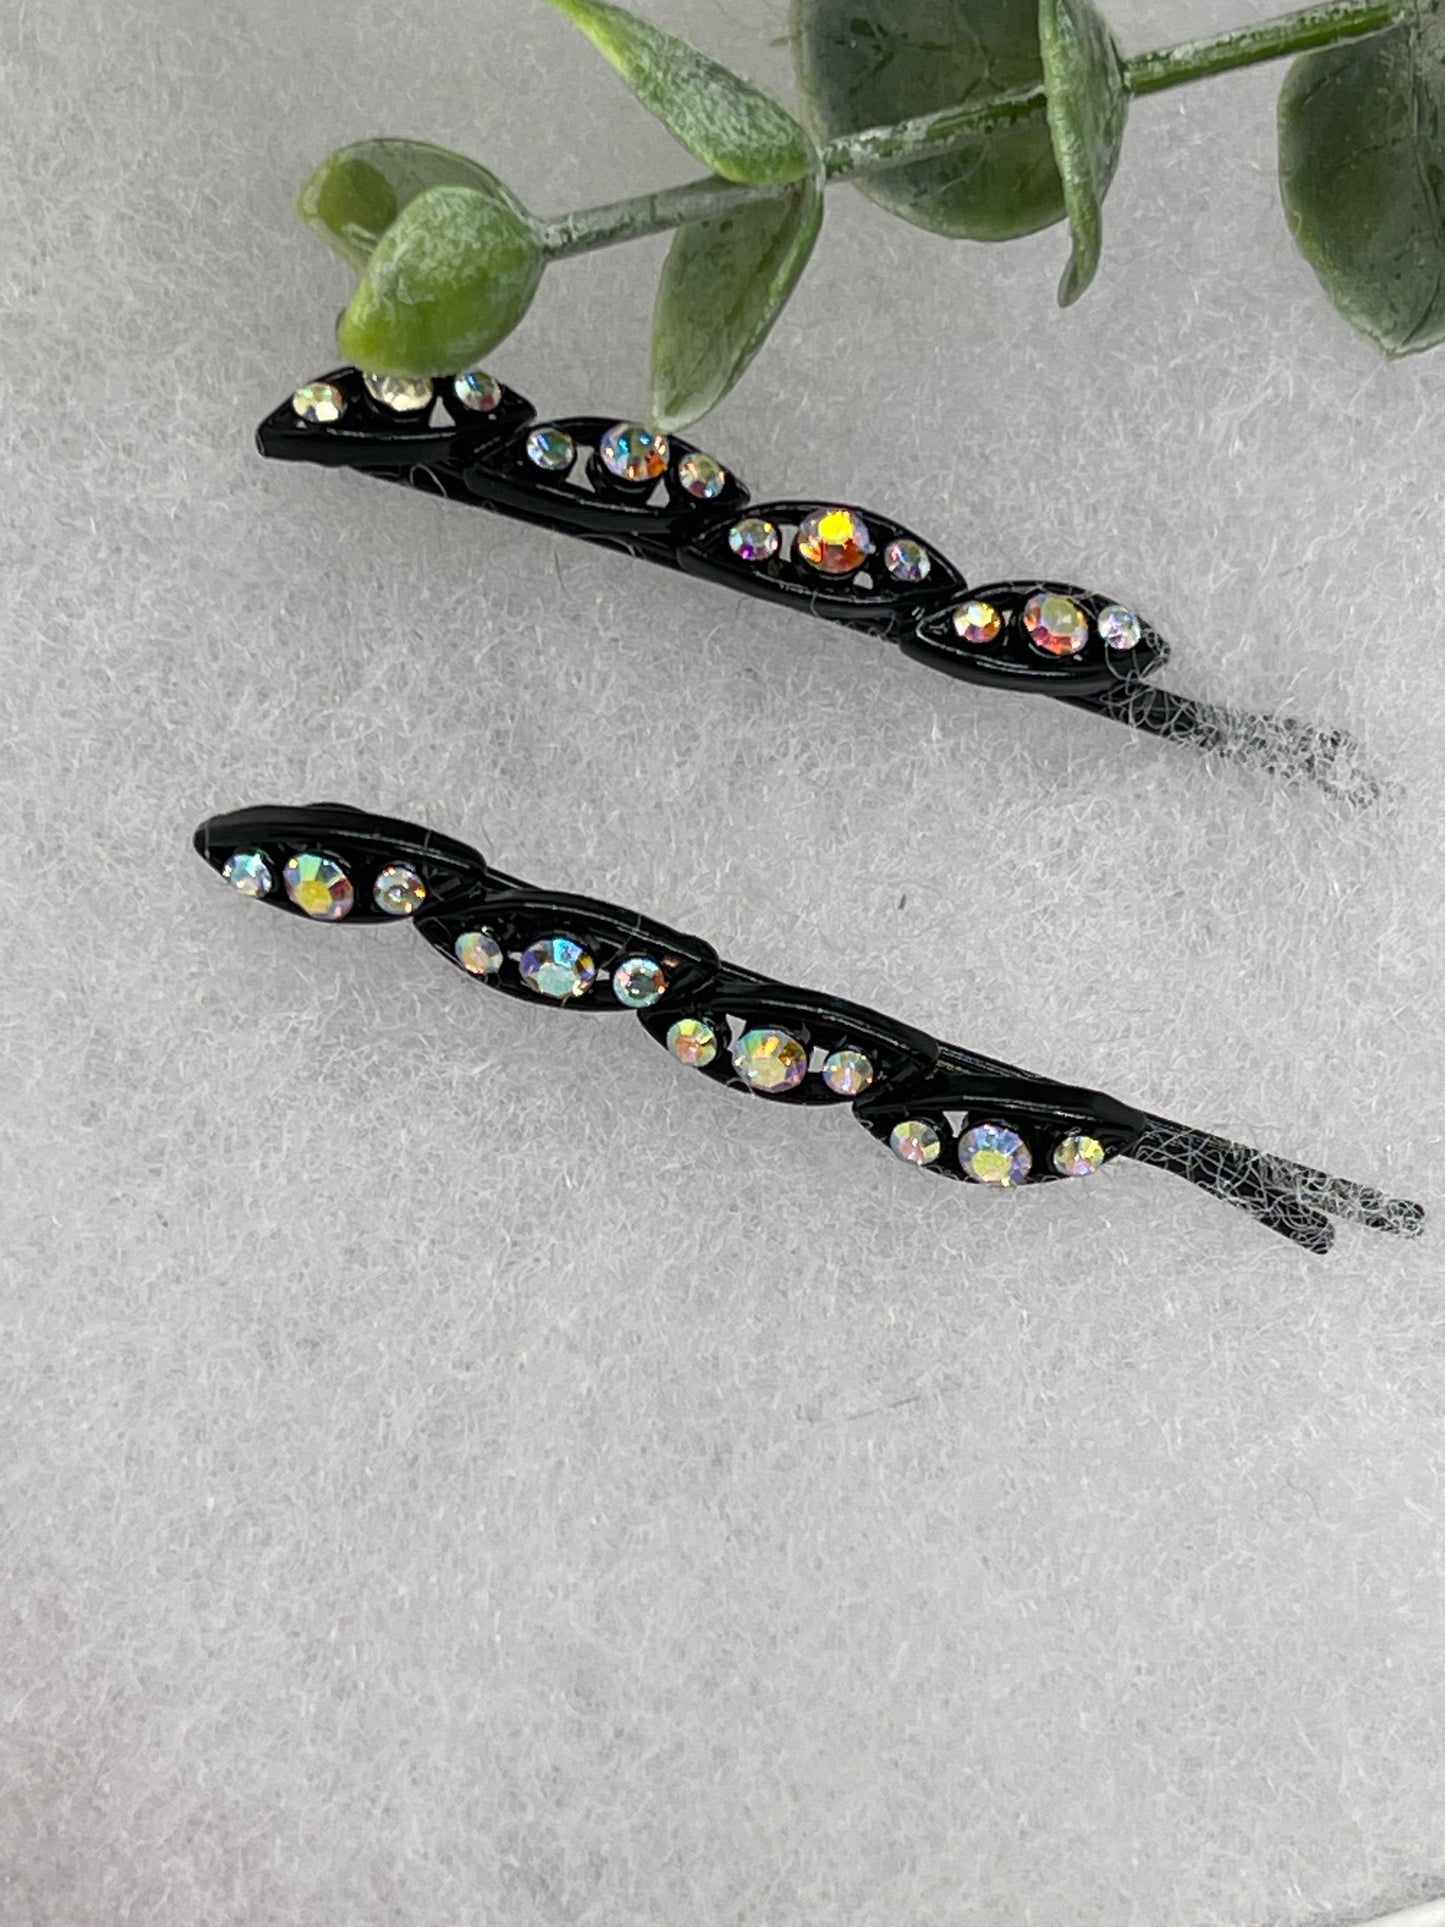 Iridescent crystal rhinestone approximately 2.5” black tone hair pins 2 pc set wedding bridal shower engagement formal princess accessory accessories